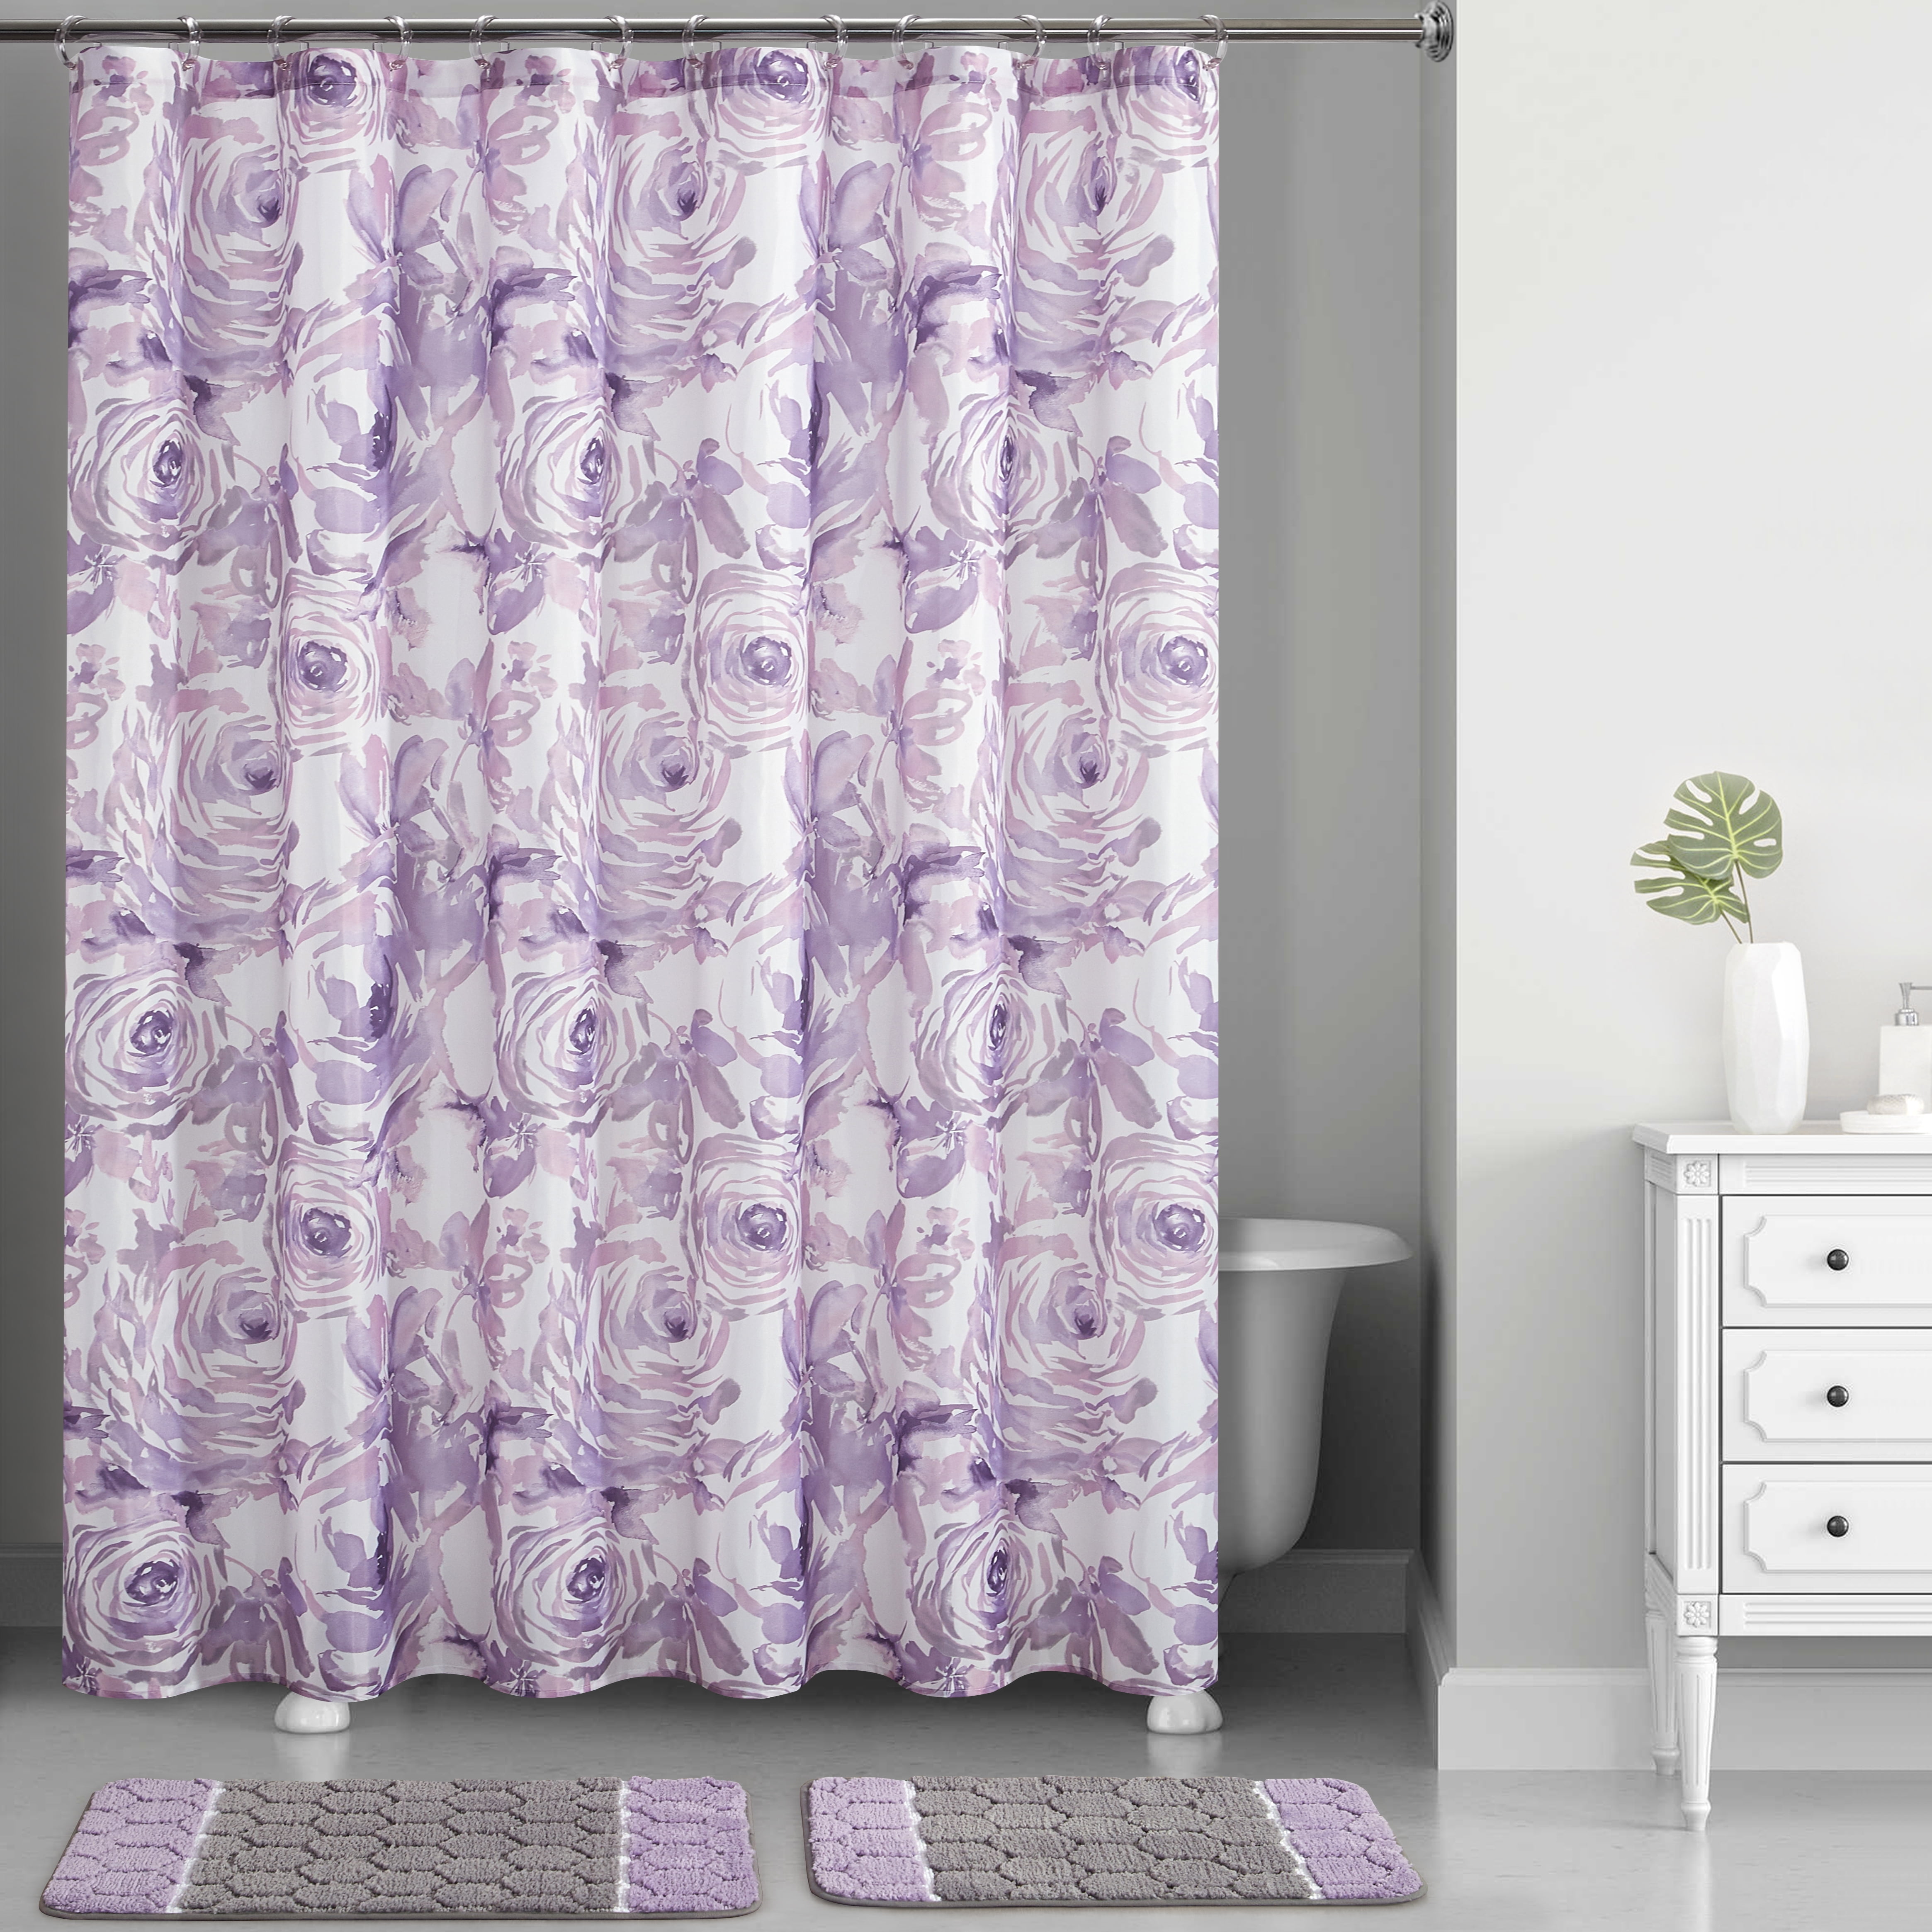 Red Rose Print SHOWER CURTAIN Beautiful  Shower Drapes with 12 Hooks 